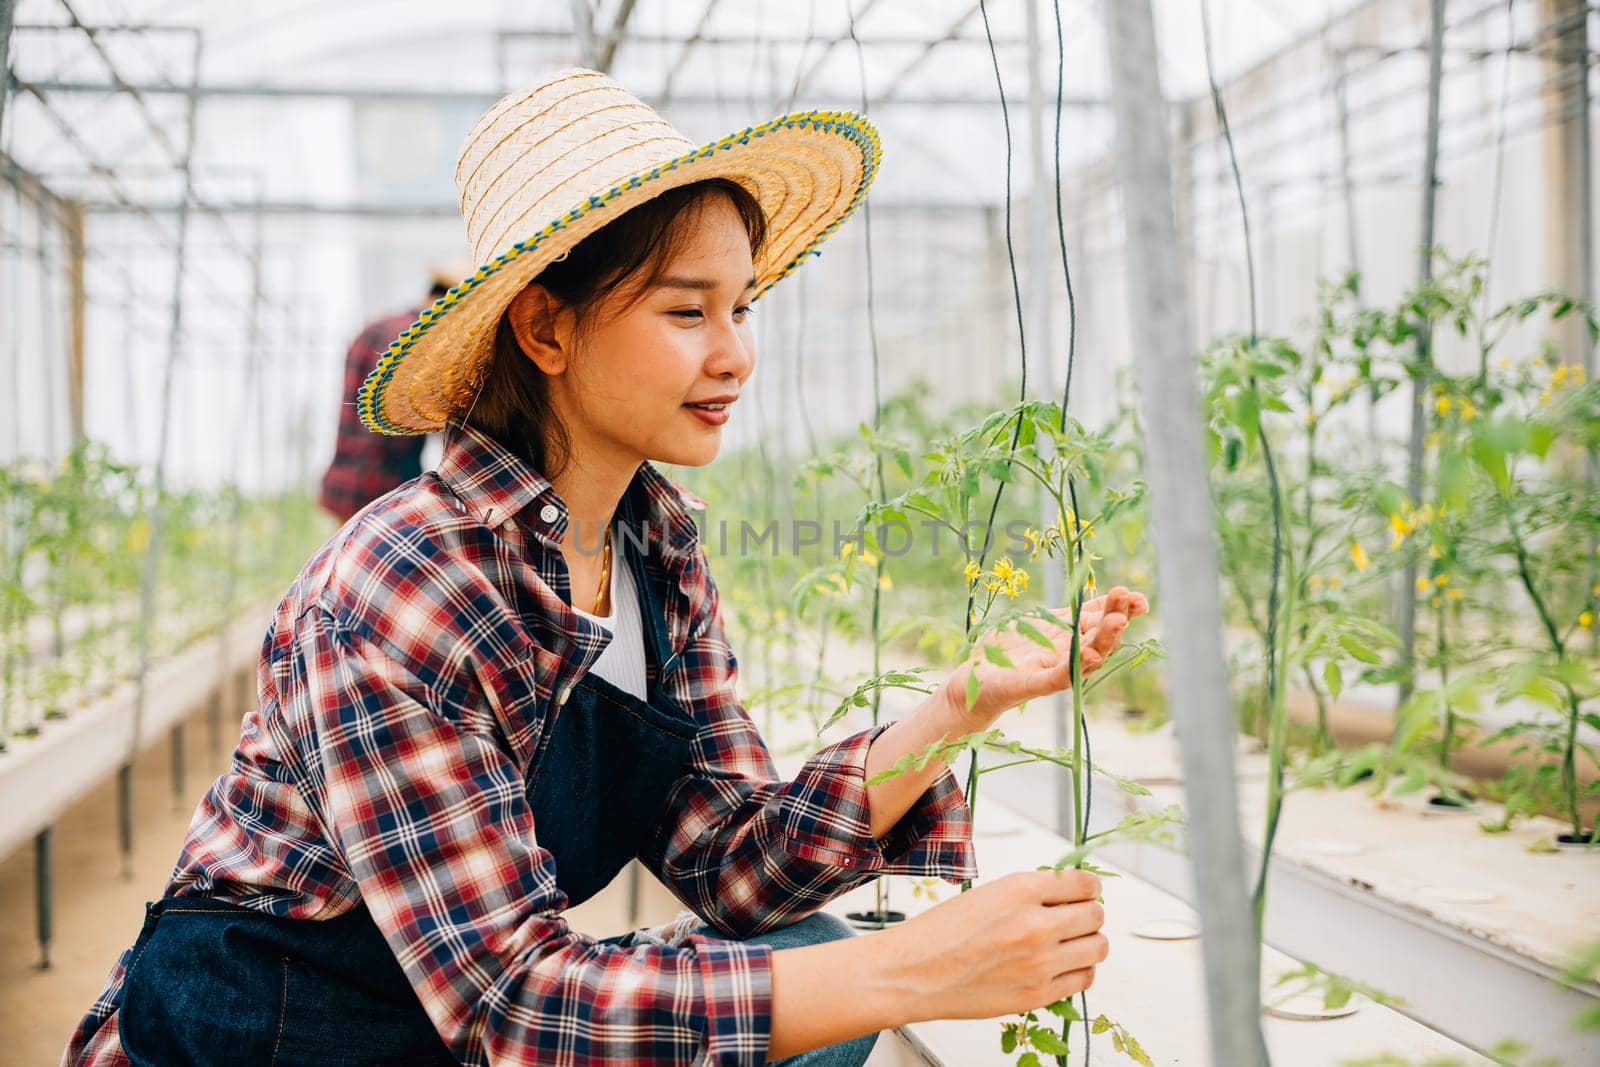 Woman in the greenhouse an entrepreneur and owner checks tomato plants for quality. Using modern technology she ensures optimal growth and care showcasing happiness in her vegetable farm environment.